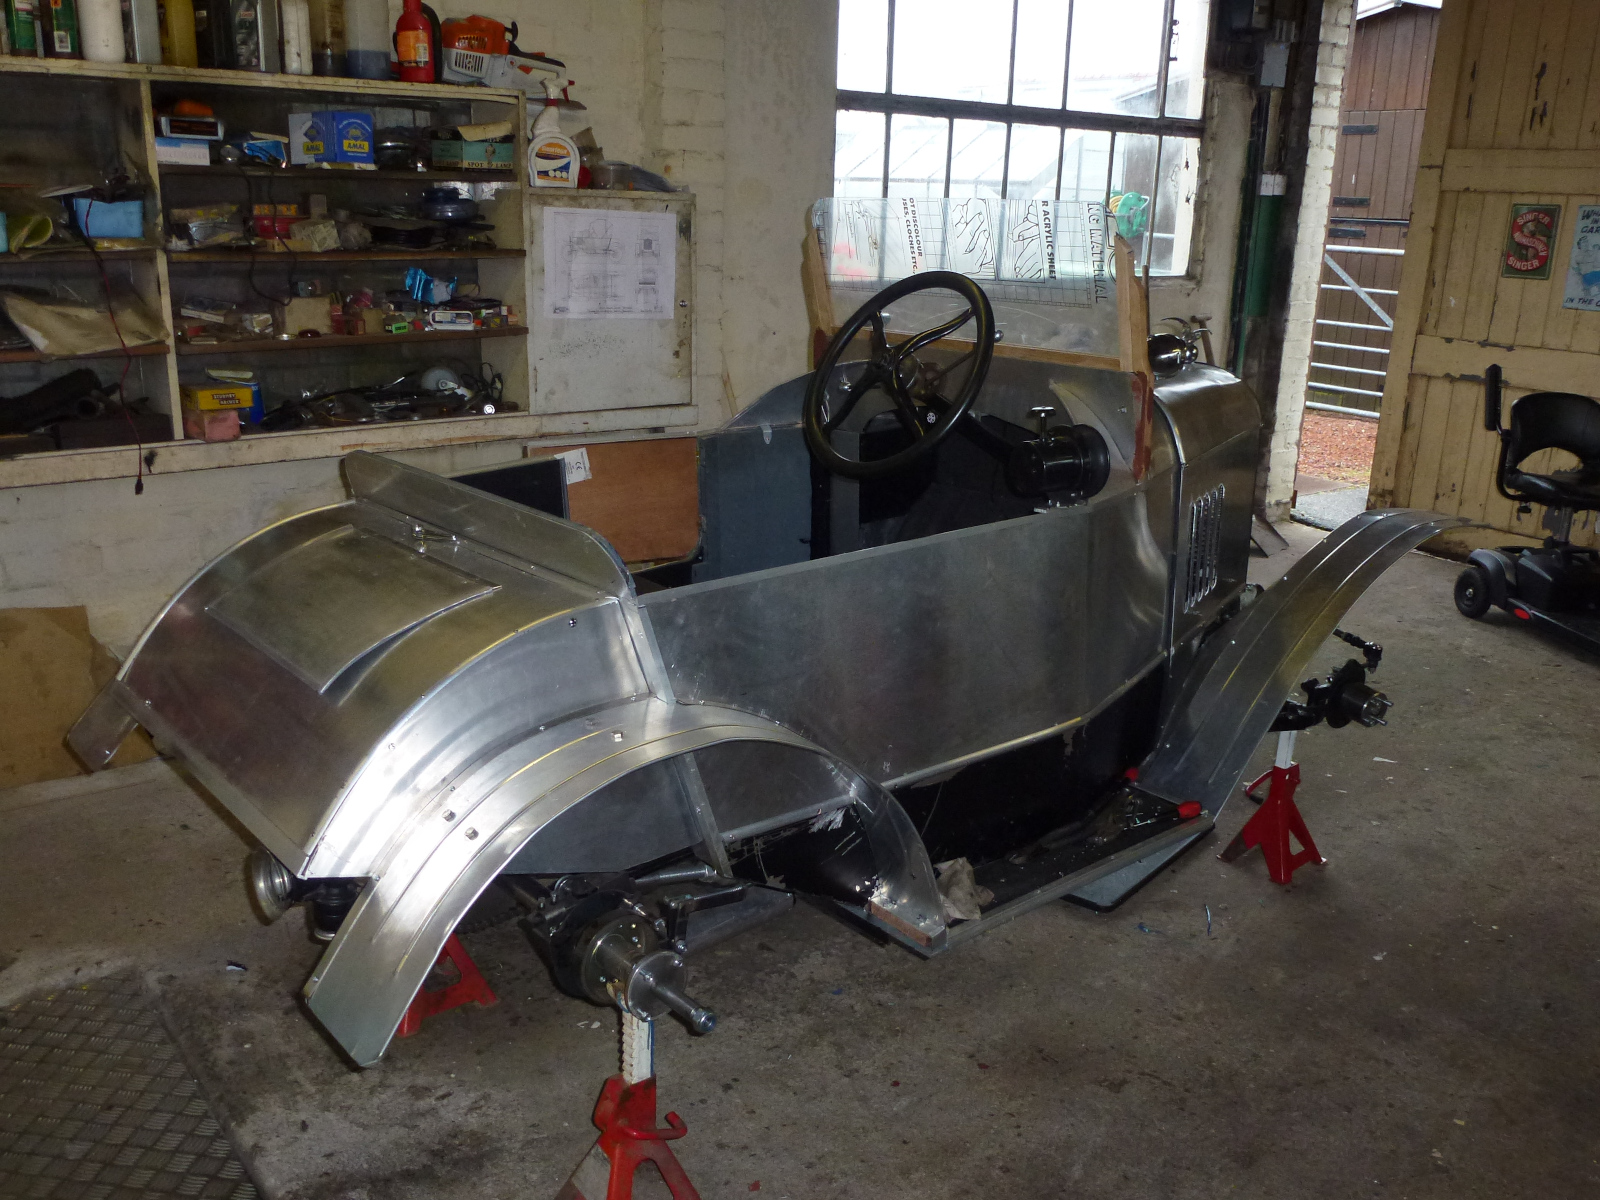 Having the car on axle stands gave easy access to refitting the overhauled engine and permitted coachwork detailing.